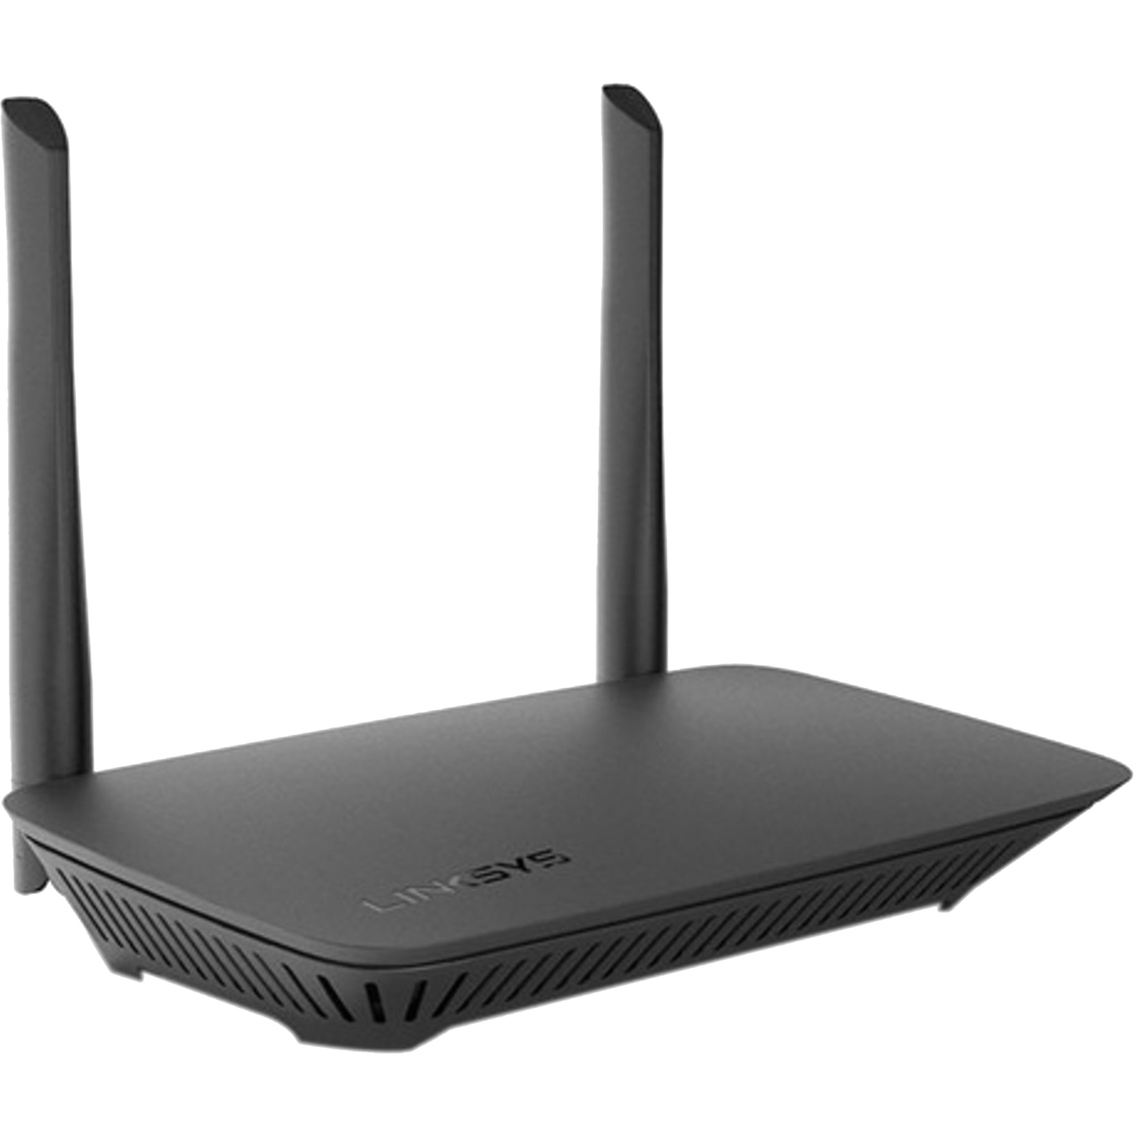 Linksys AC1000 Dual Band Wi-Fi Router - Image 2 of 4